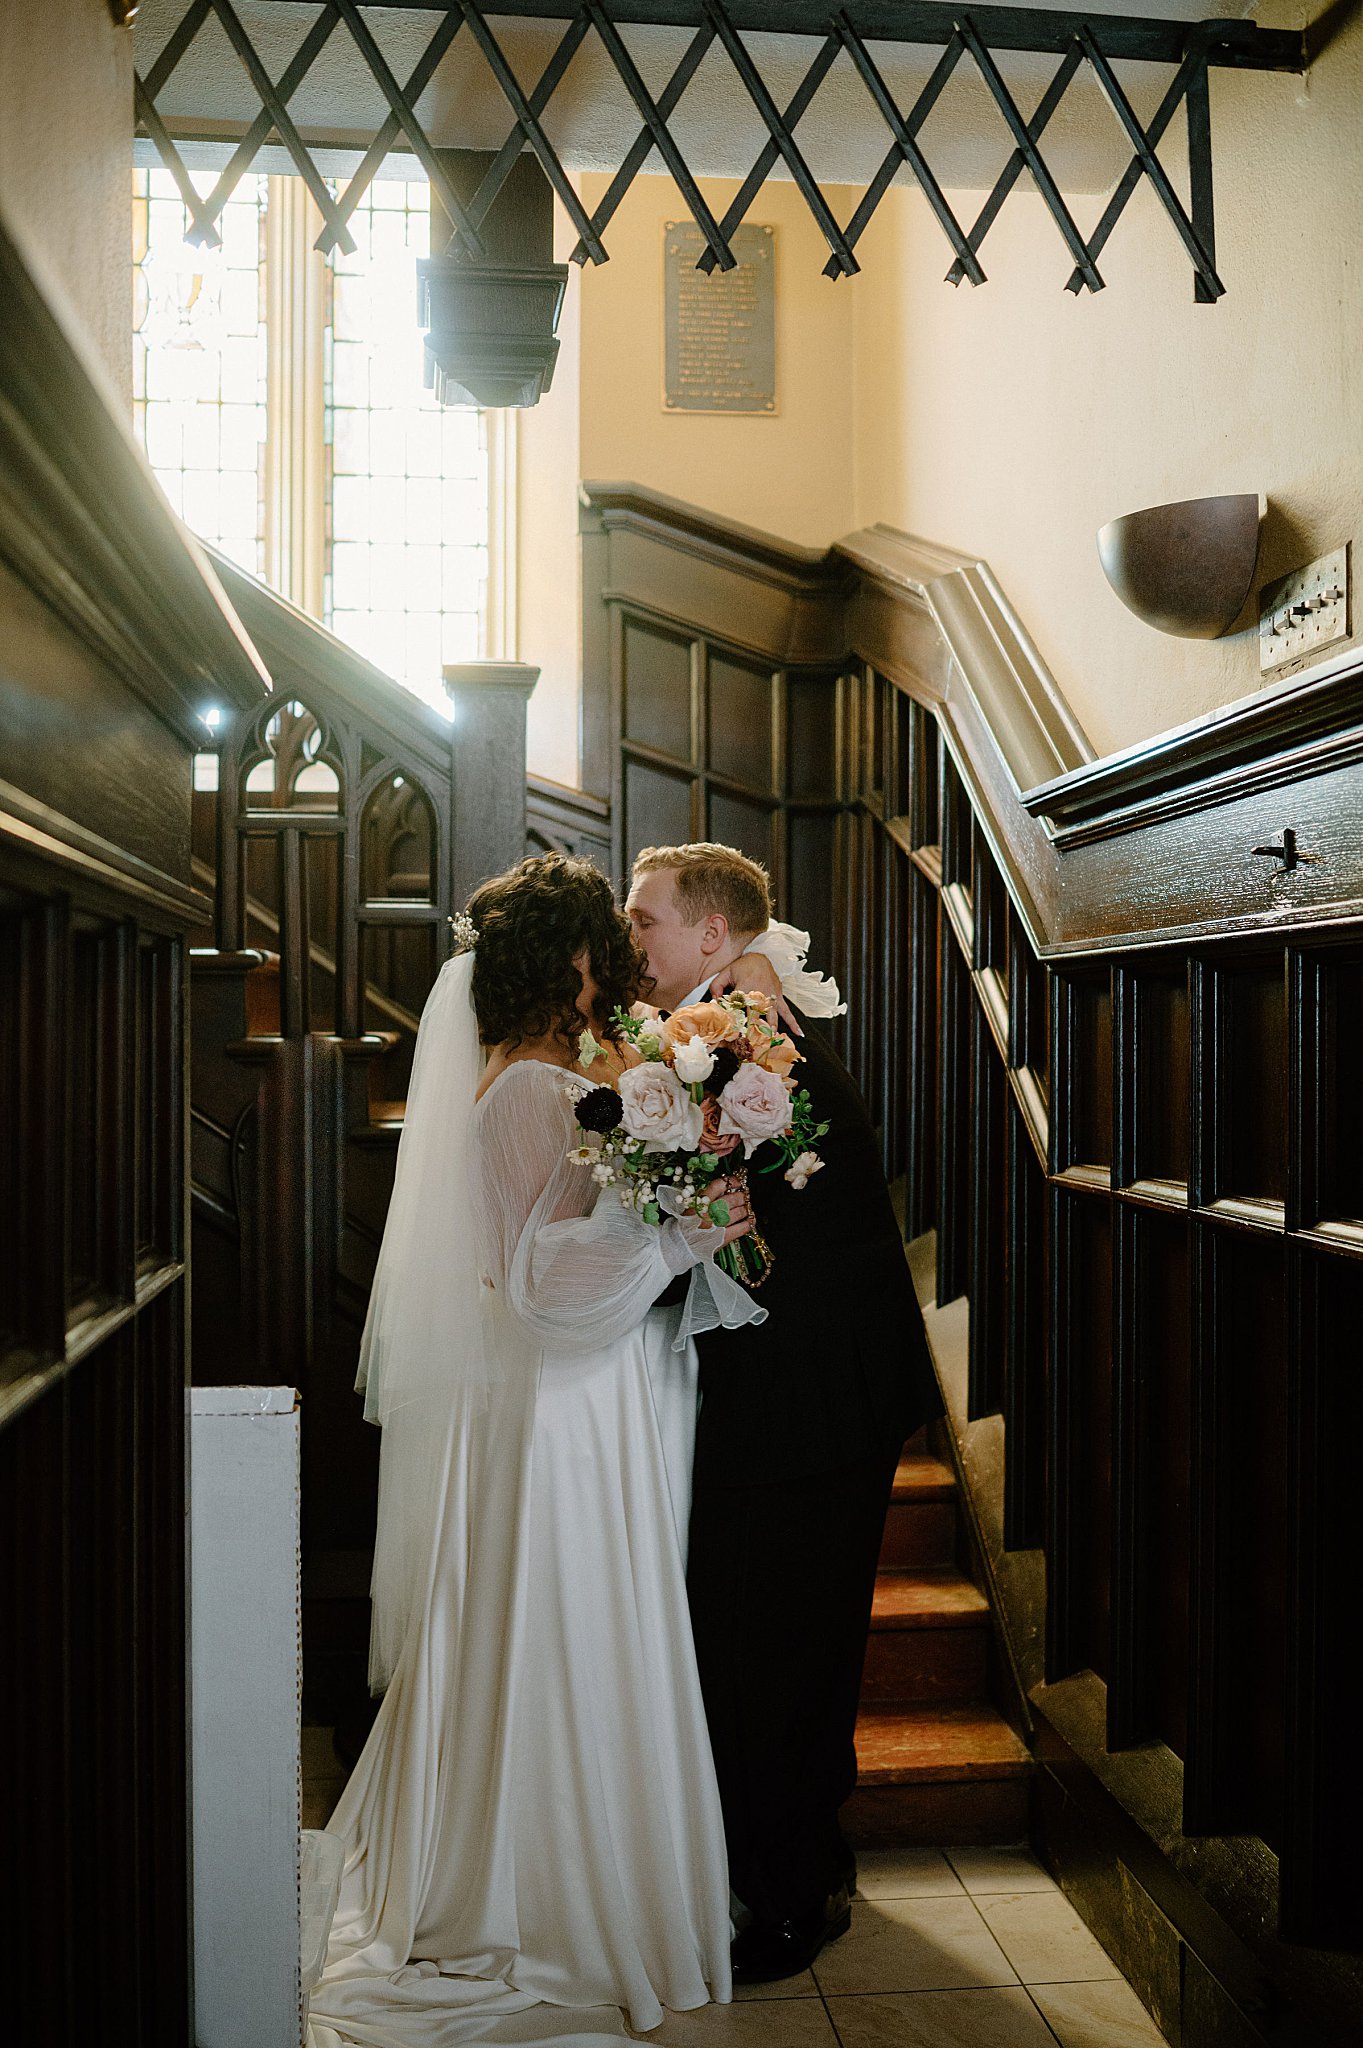 bride and groom steal a kiss in the stairwell of church by Indigo Lace Collective